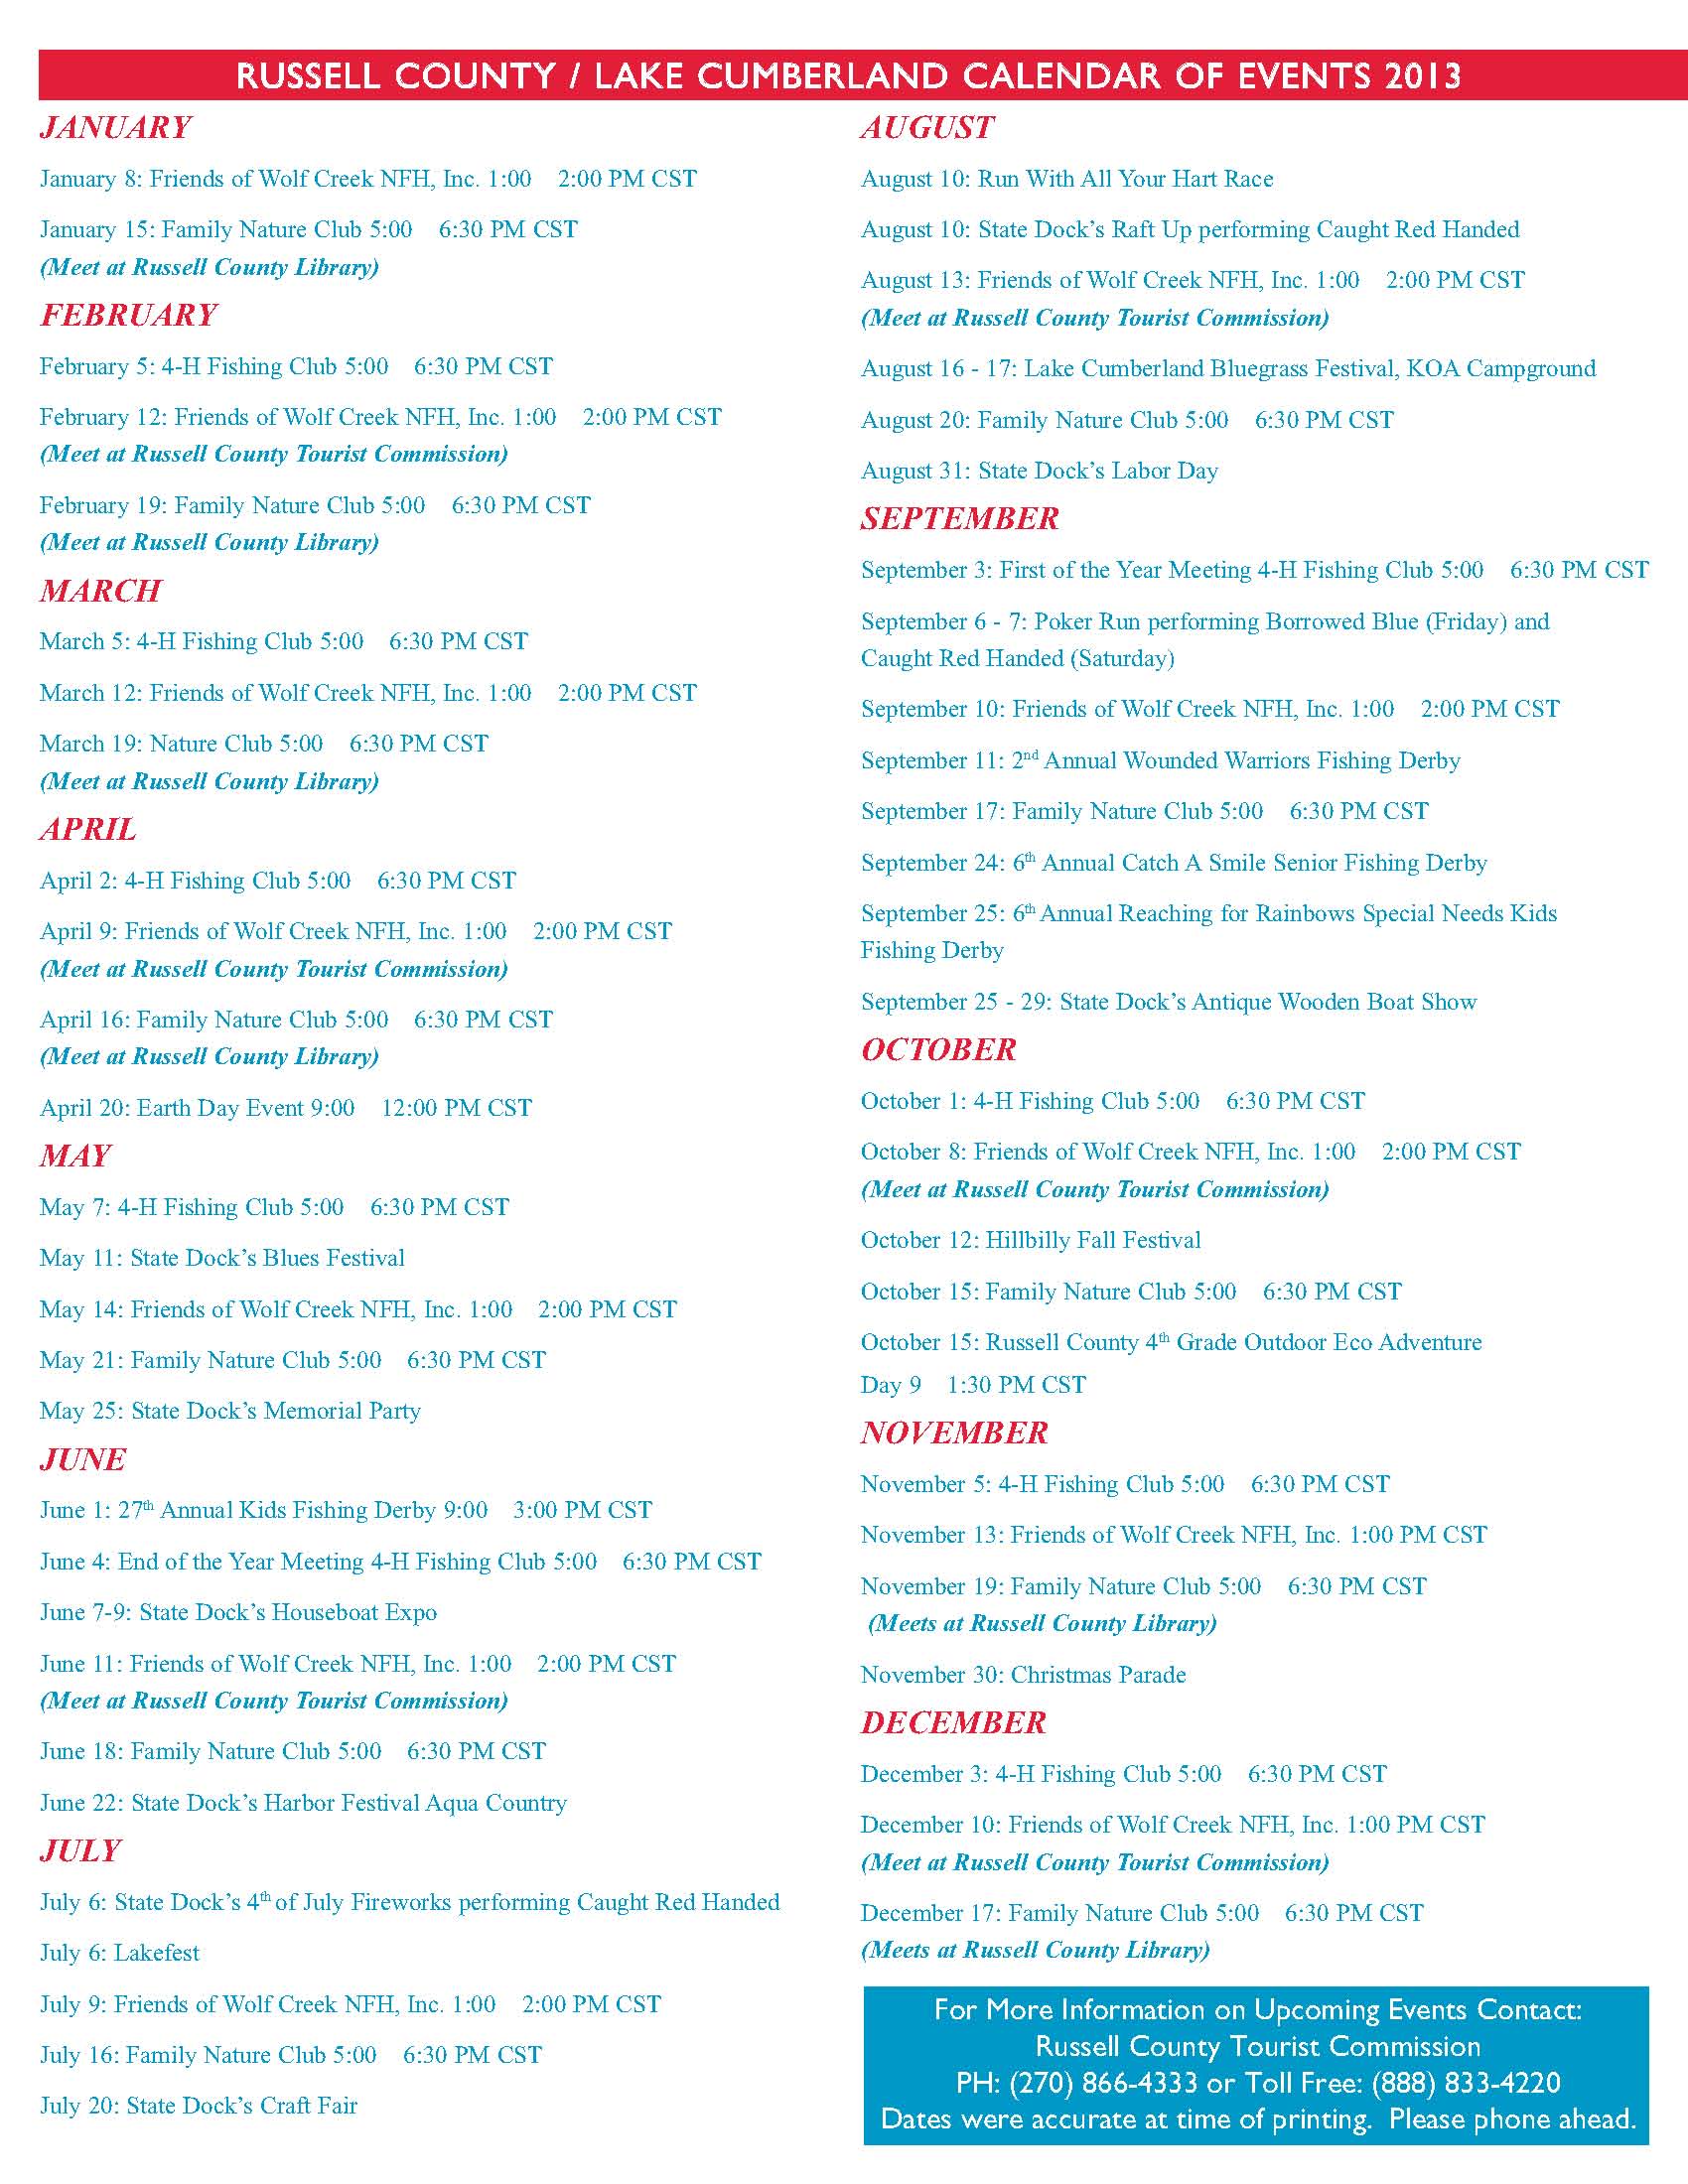 visitor-guide2013-web_Page_04.jpg